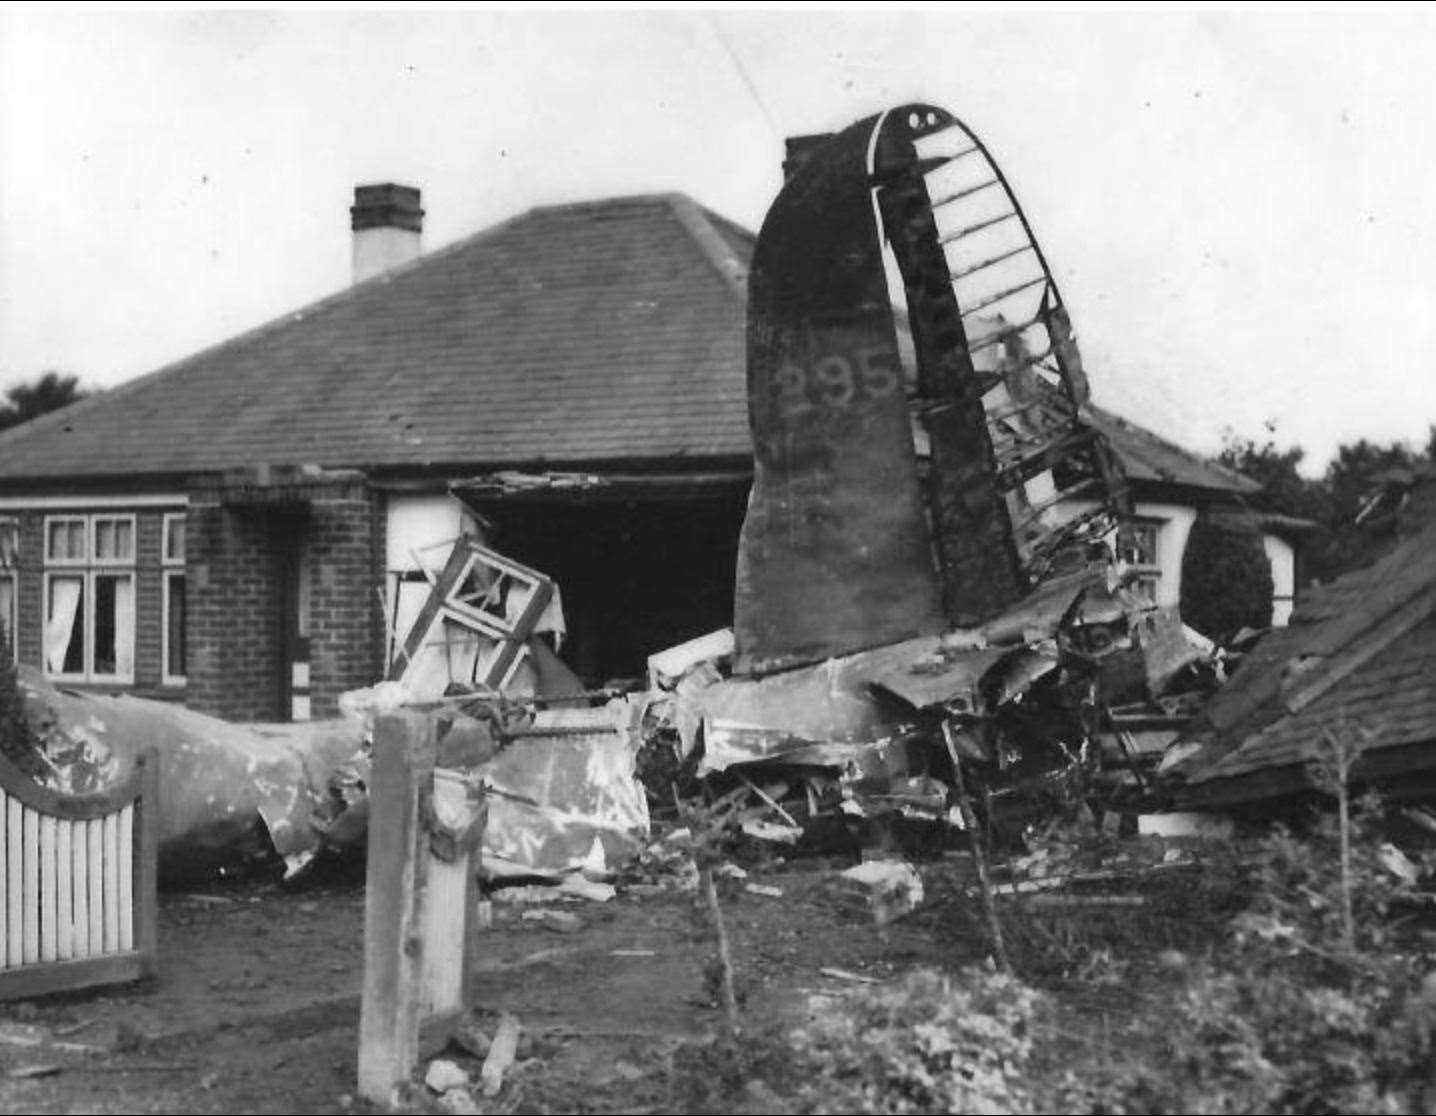 The B-26 crashed into a house in Chelmsford Road in poor weather just miles from Matching airfield on its way back from France